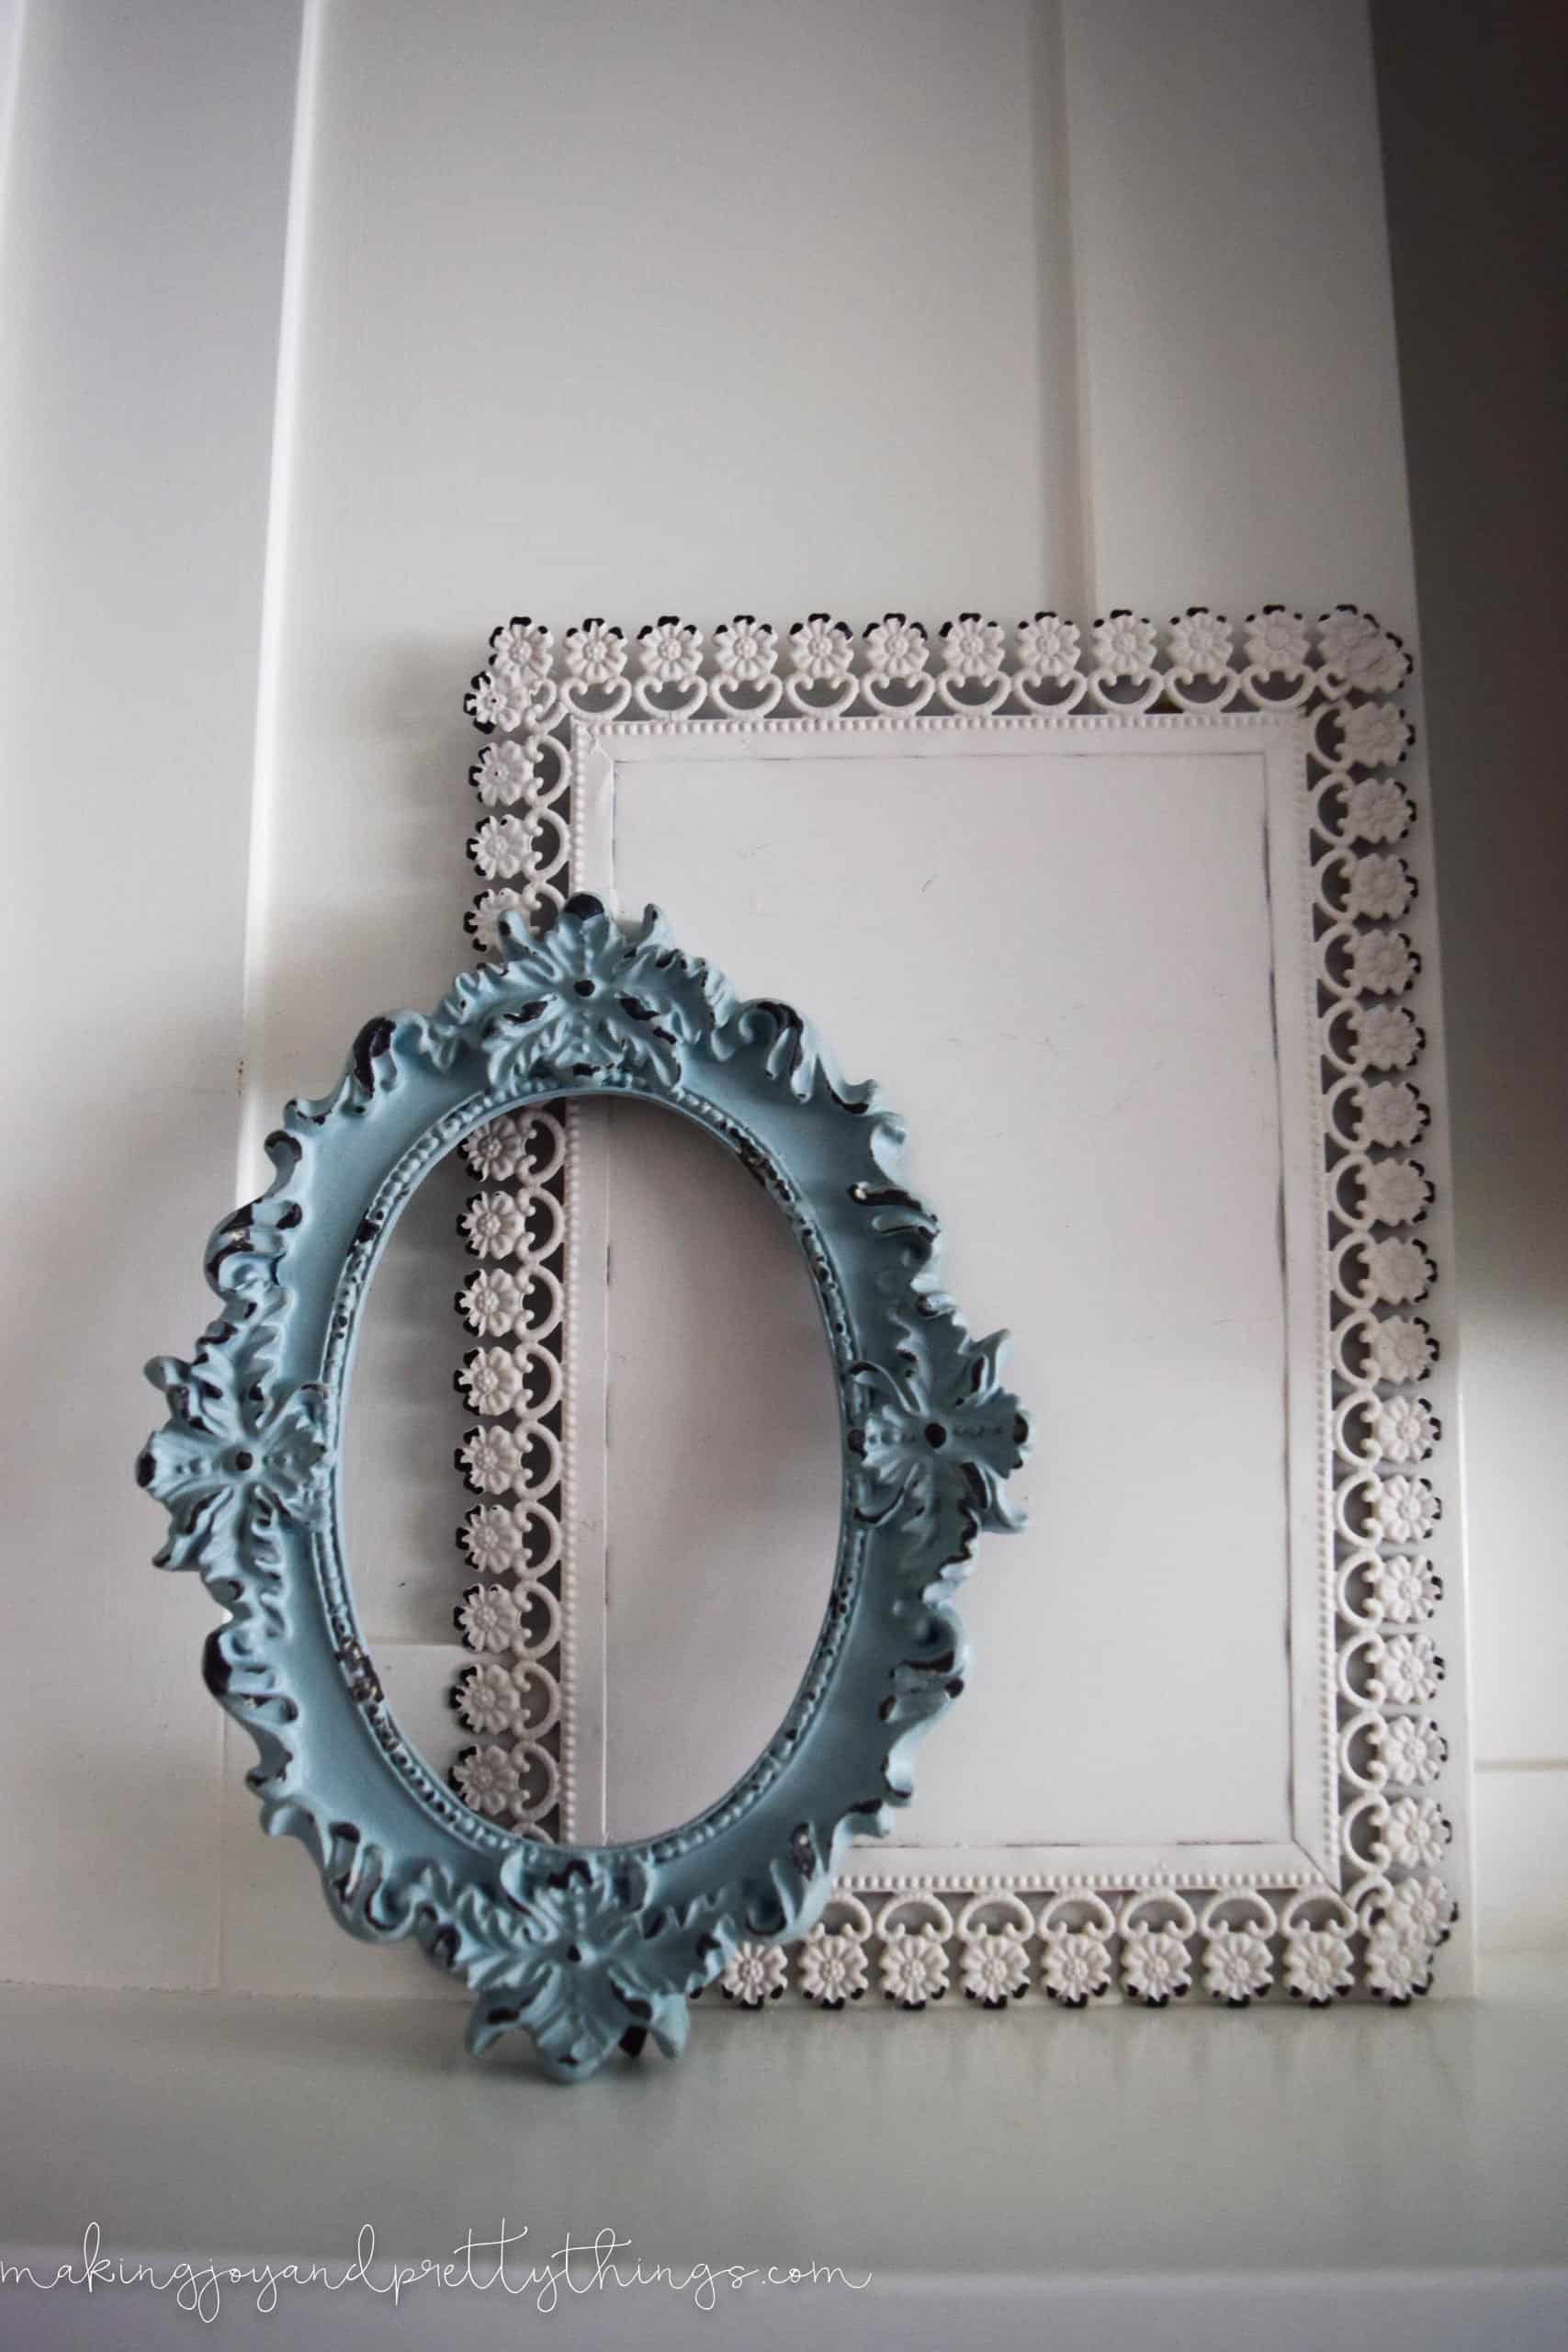 Two empty, mismatched farmhouse style frame. The front frame is a small teal blue oval frame; the background frame is white with a floral pattern around the edges.